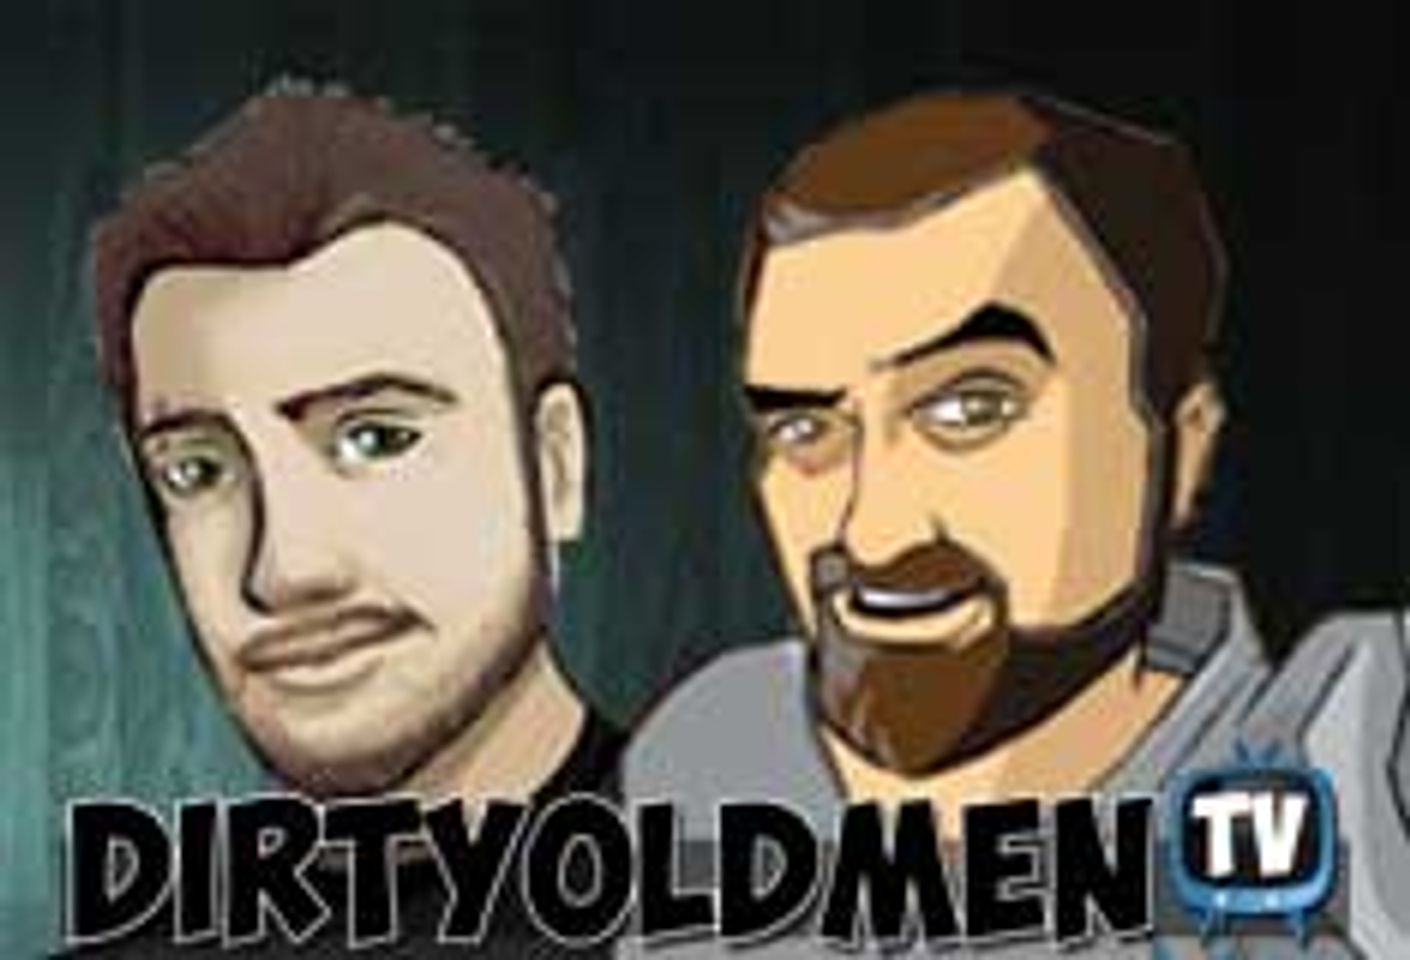 DirtyOldMen.tv Webcast to Feature Kate Darling Today